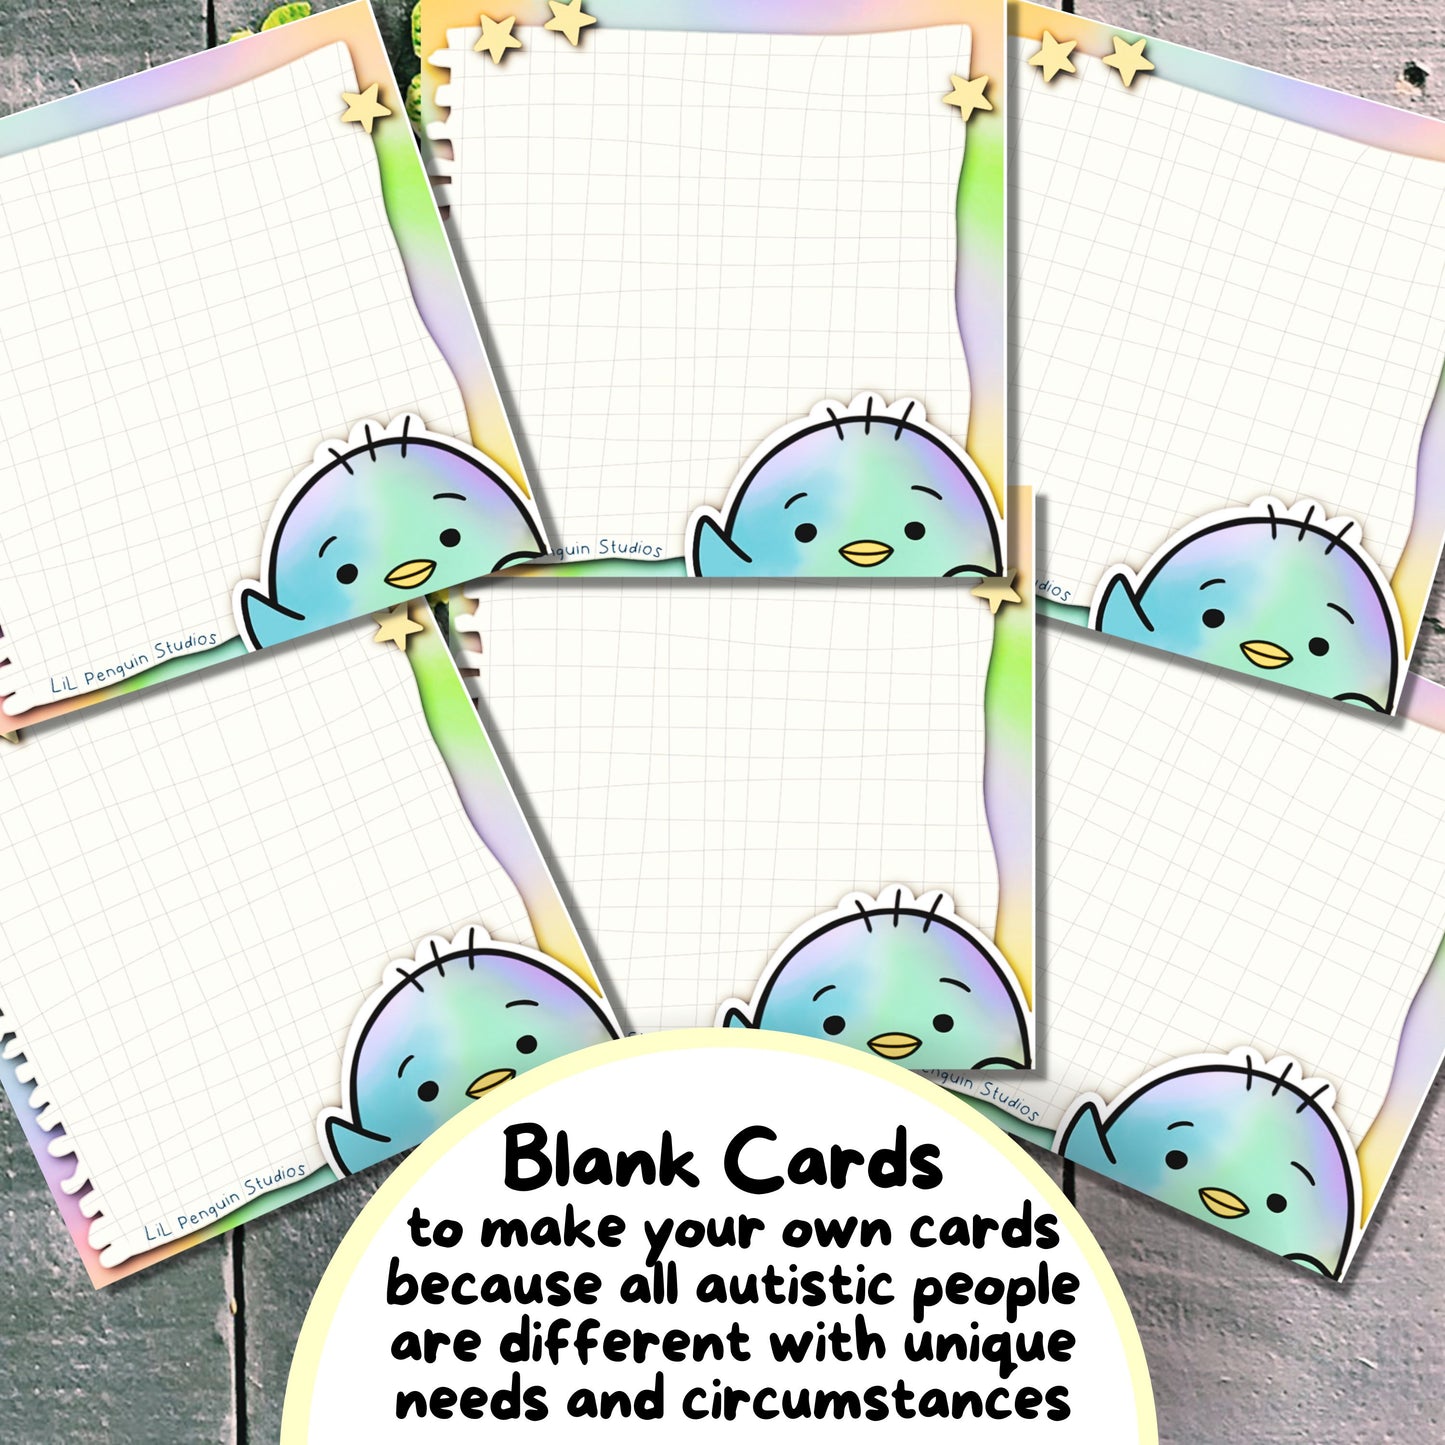 Communication Cards with Explanations . blank cards are also included: to make your own cards because all autistic people are different with unique needs and circumstances - Autism Self-Advocacy Card Pack (School, Work, Friends, Family) written and hand-drawn by an autistic artist (LiL Penguin Studios( 